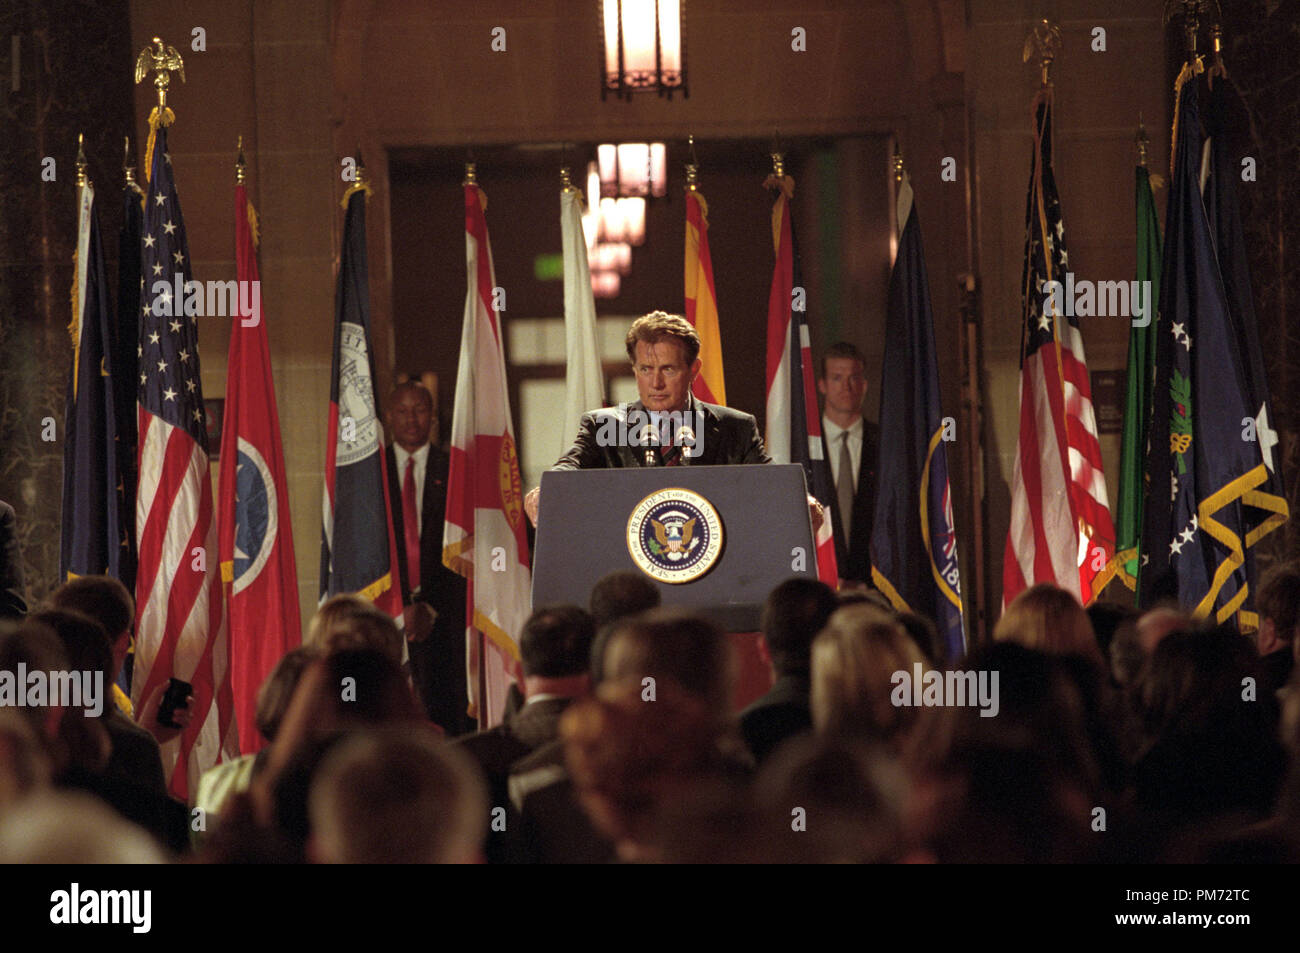 Film Still / Publicity Still from 'The West Wing' Episode: 'Two CaThedrals' Martin Sheen May 16, 2001 File Reference # 30847114THA  For Editorial Use Only -  All Rights Reserved Stock Photo